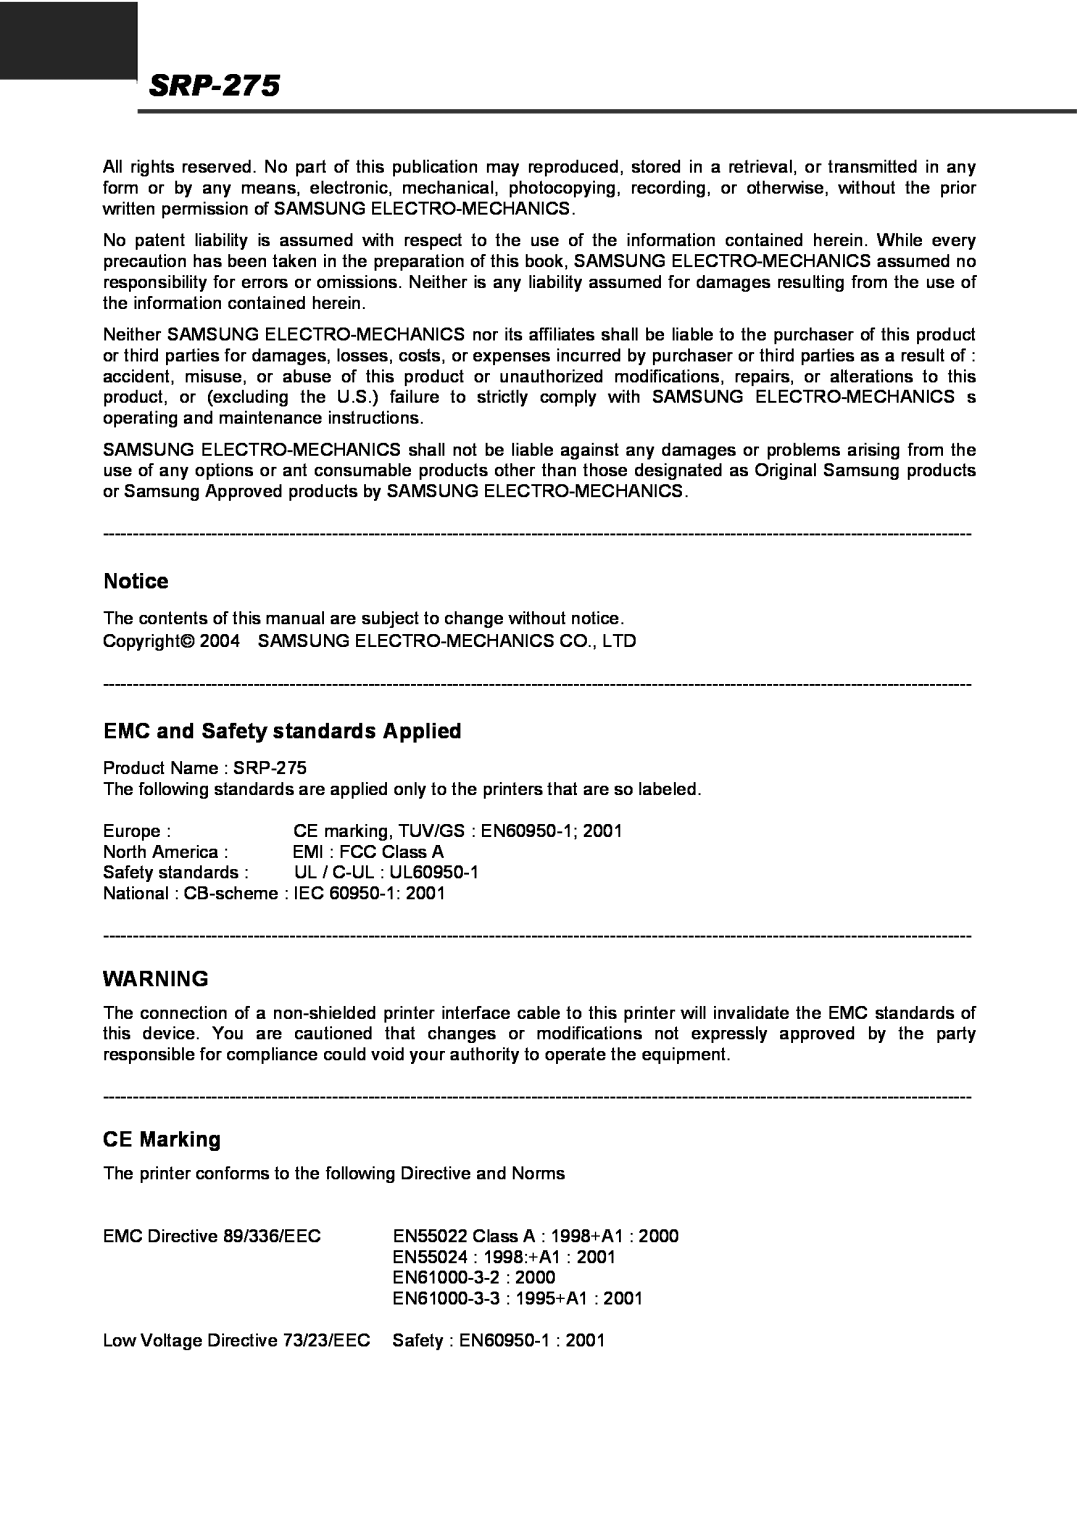 Samsung SRP275APG user manual SRP-275, EMC and Safety standards Applied, CE Marking 